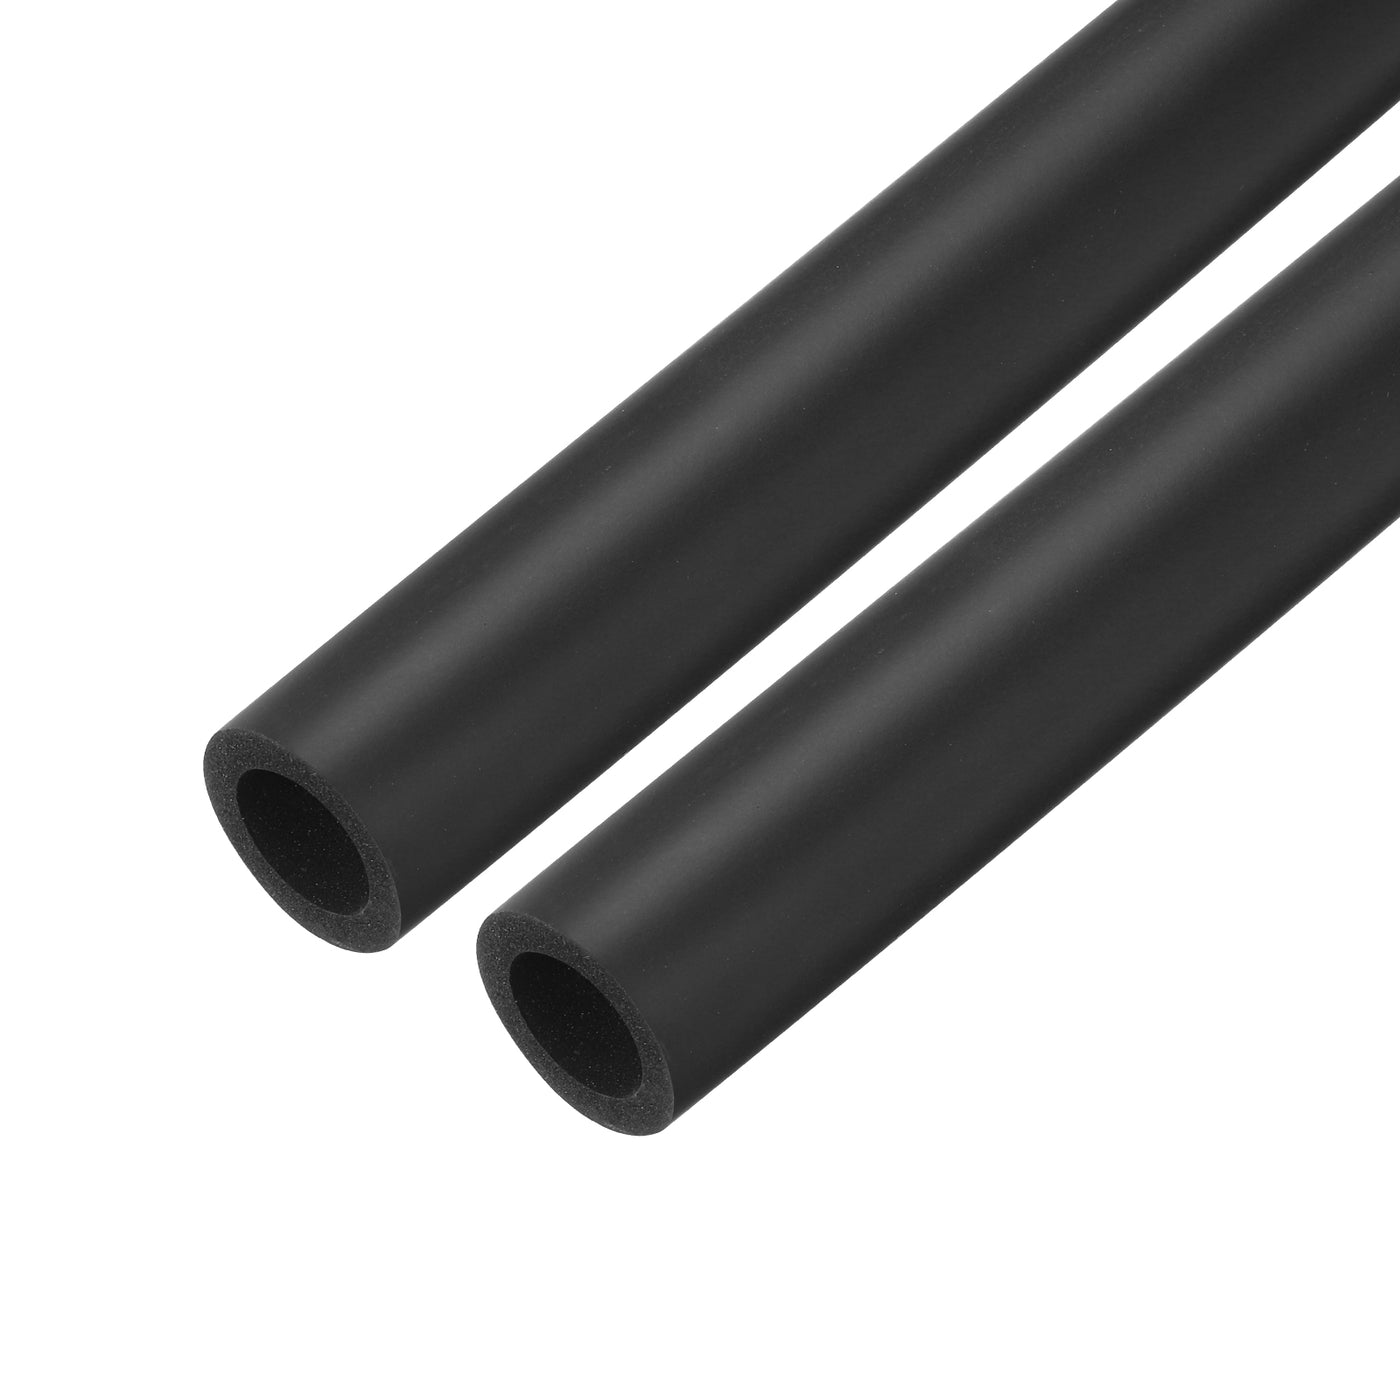 uxcell Uxcell 2pcs 3.3ft Pipe Insulation Tube 20mm ID 30mm OD Foam Tubing for Handle Grip Support, Black